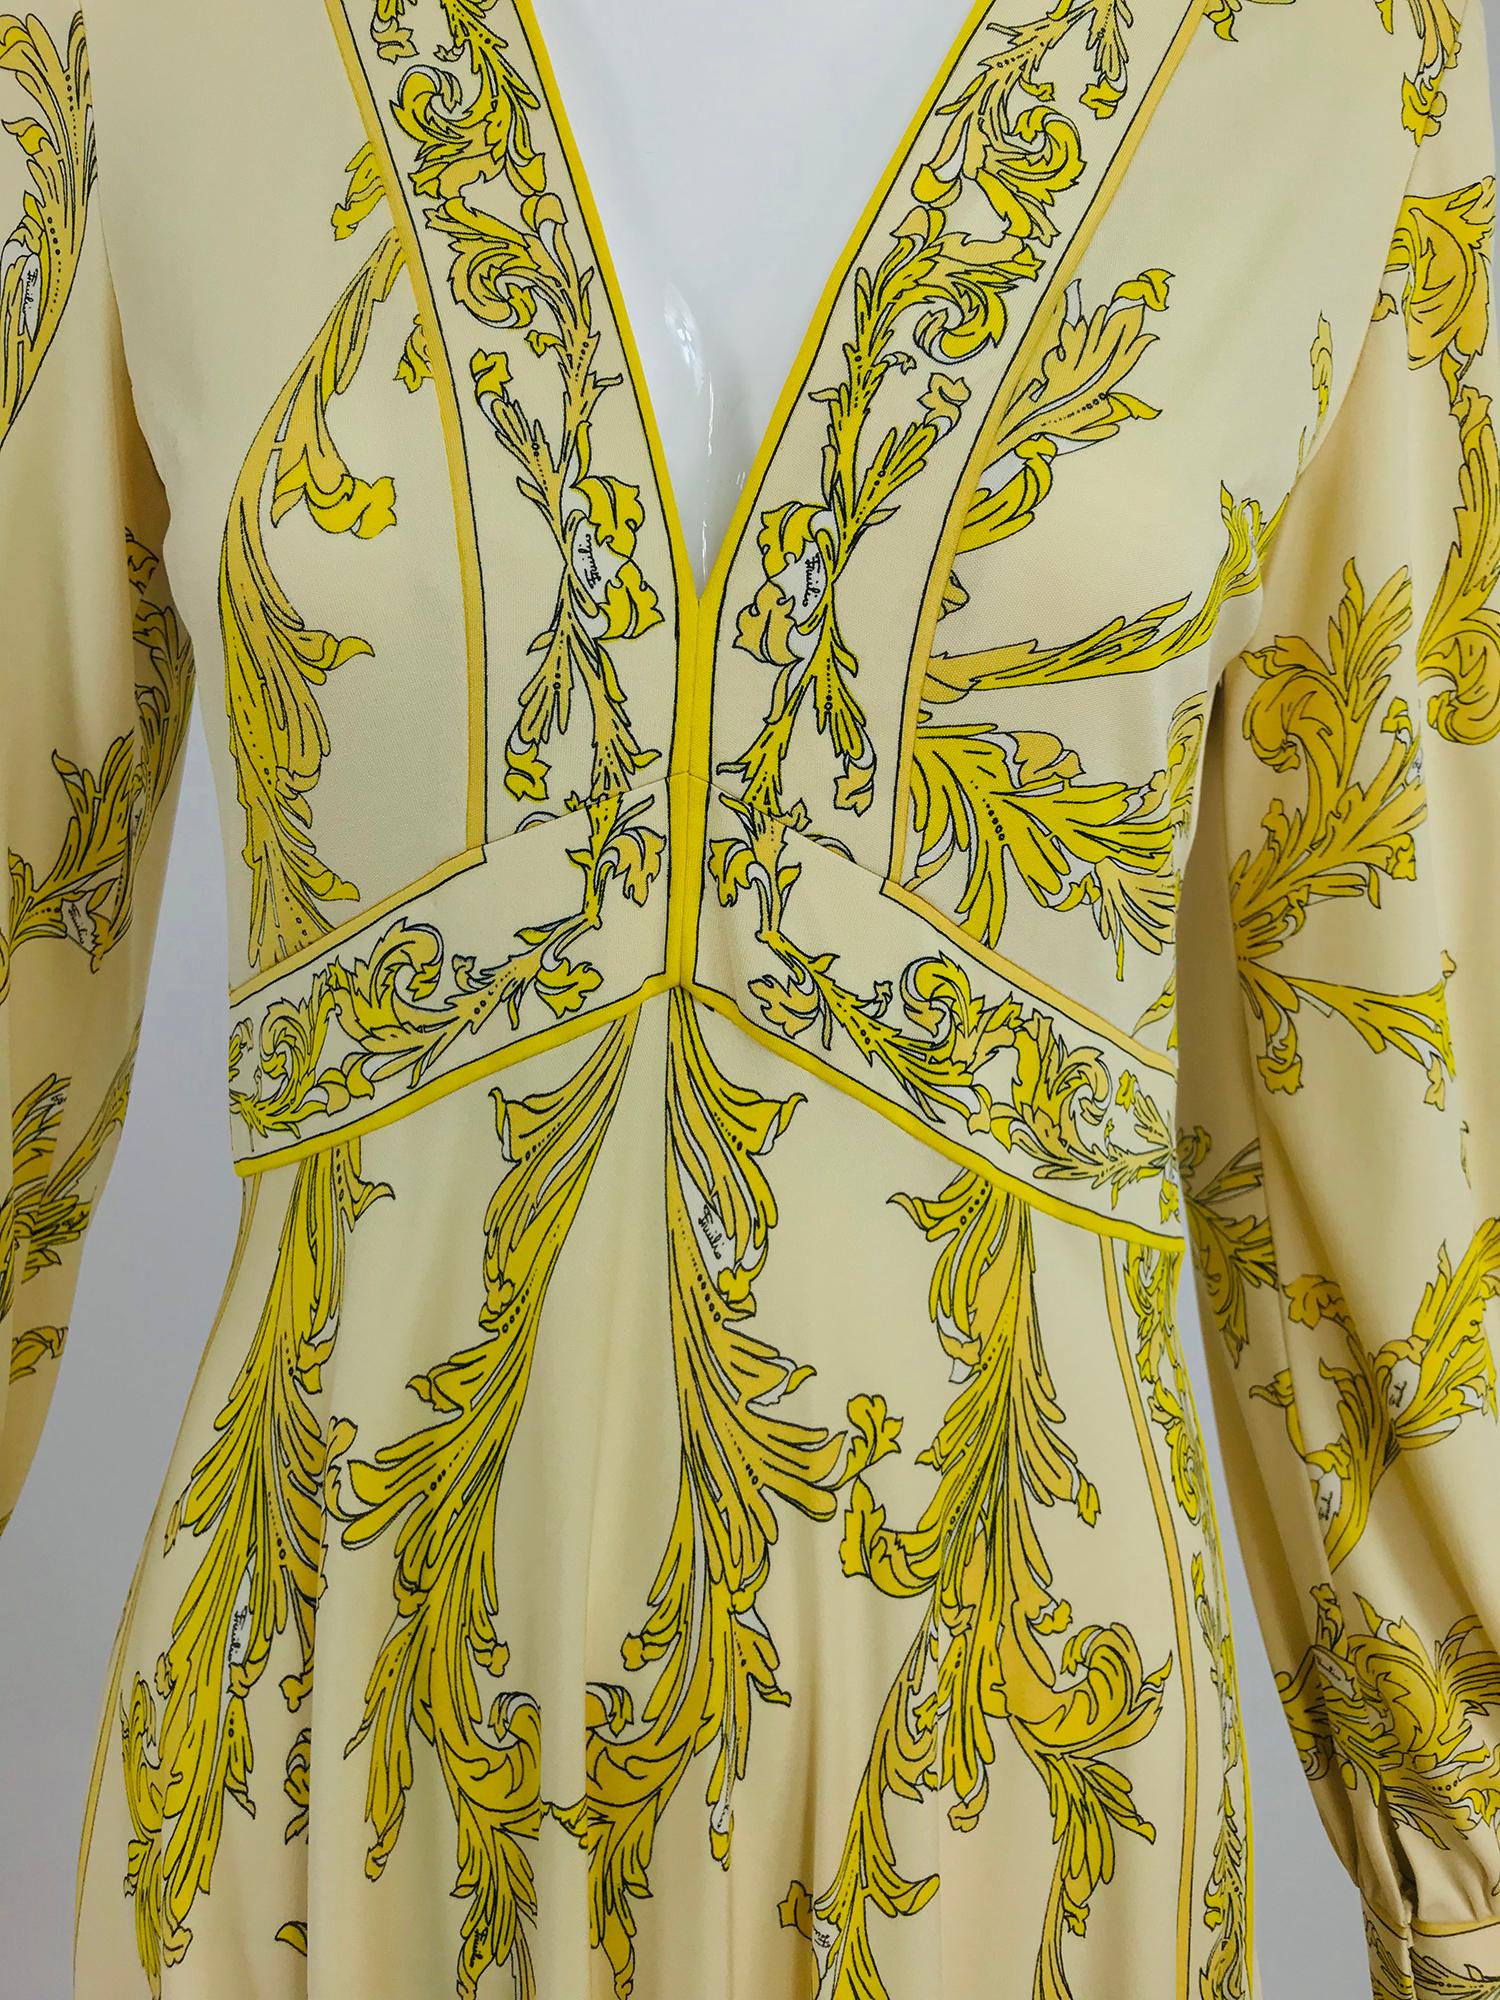 Emilio Pucci Silk jersey Print V Neck Dress from the 1970s. Silk jersey in shades of yellow against a champagne background, black outlines the design. Banded V neckline with a high banded waist, long sleeves have banded cuffs that close with hidden